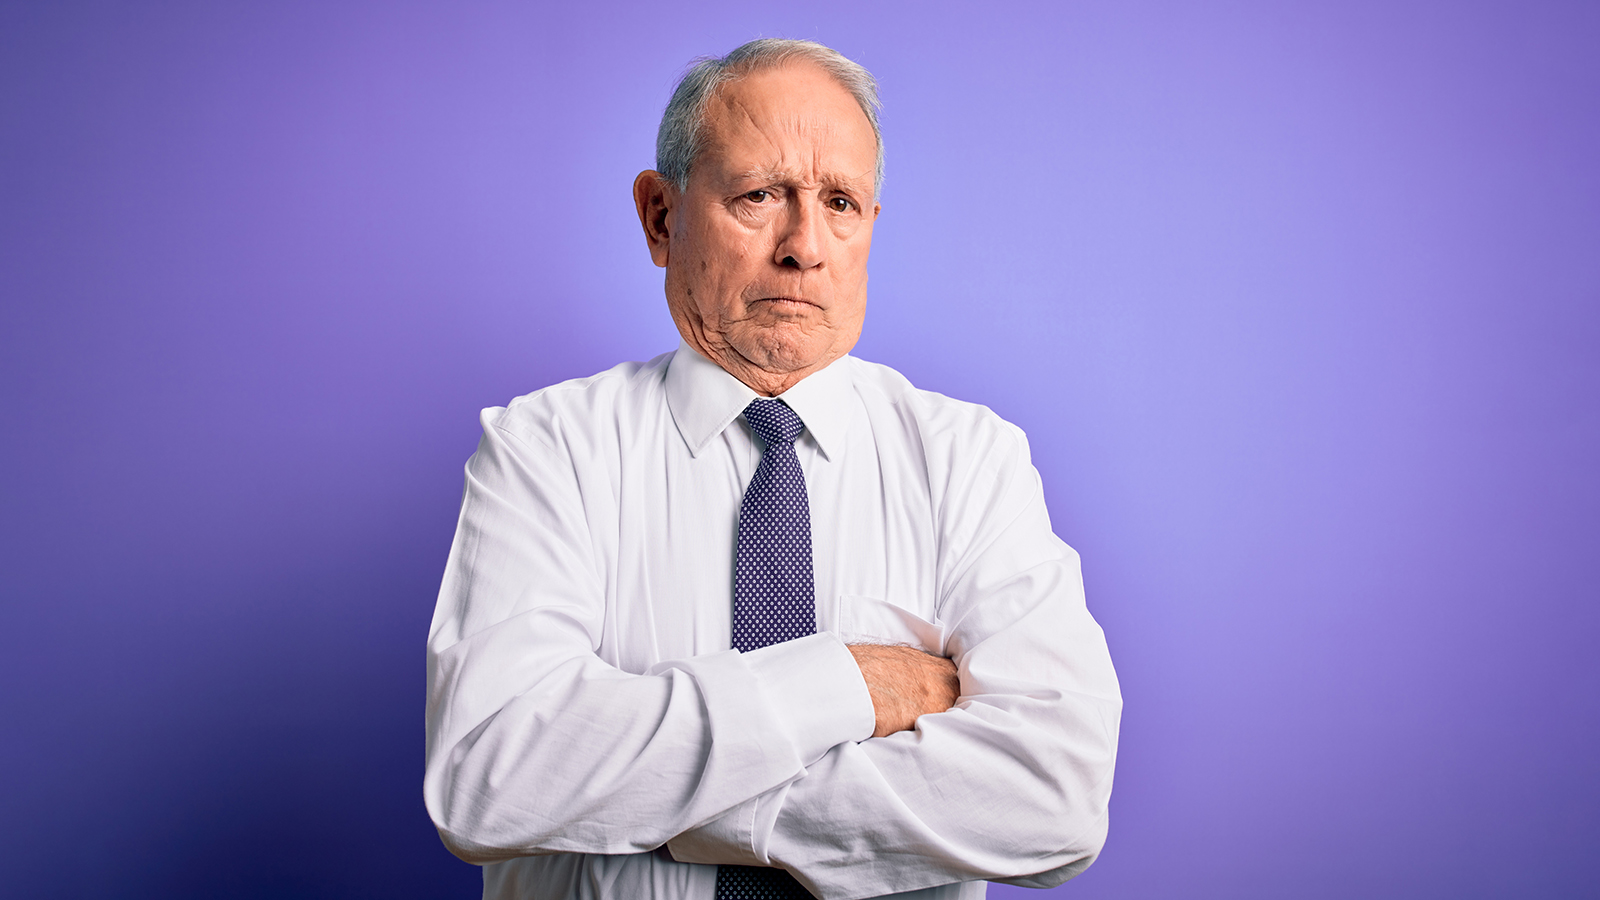 Grey haired senior business elegant man standing over purple isolated background skeptic and nervous, disapproving expression on face with crossed arms. Negative person.